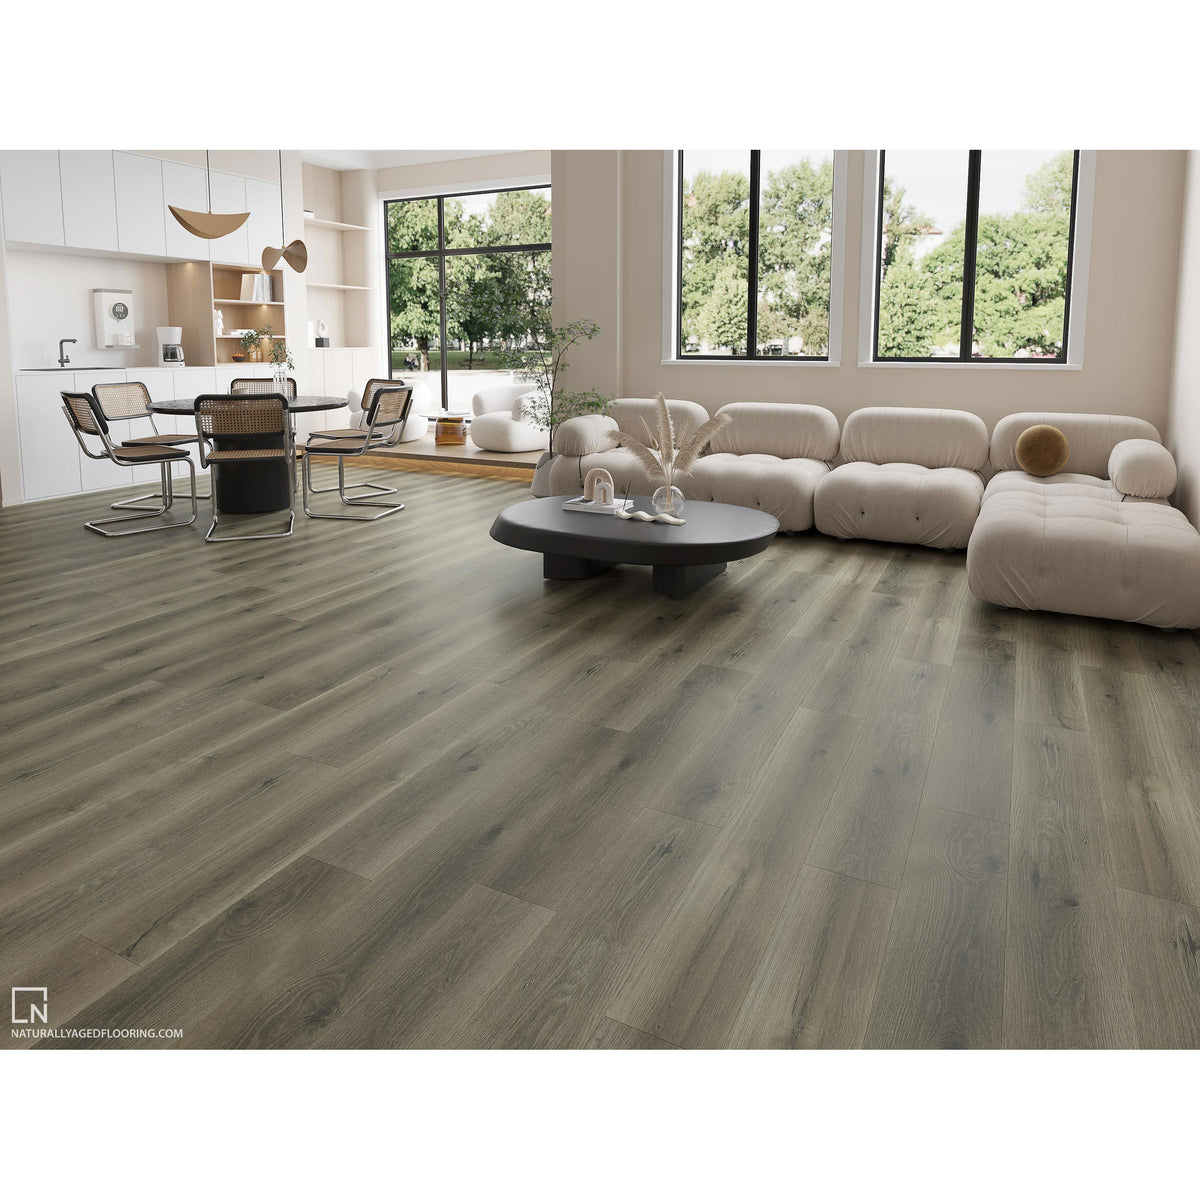 Naturally Aged Flooring - Northshore Laminate - Pipeline Installed